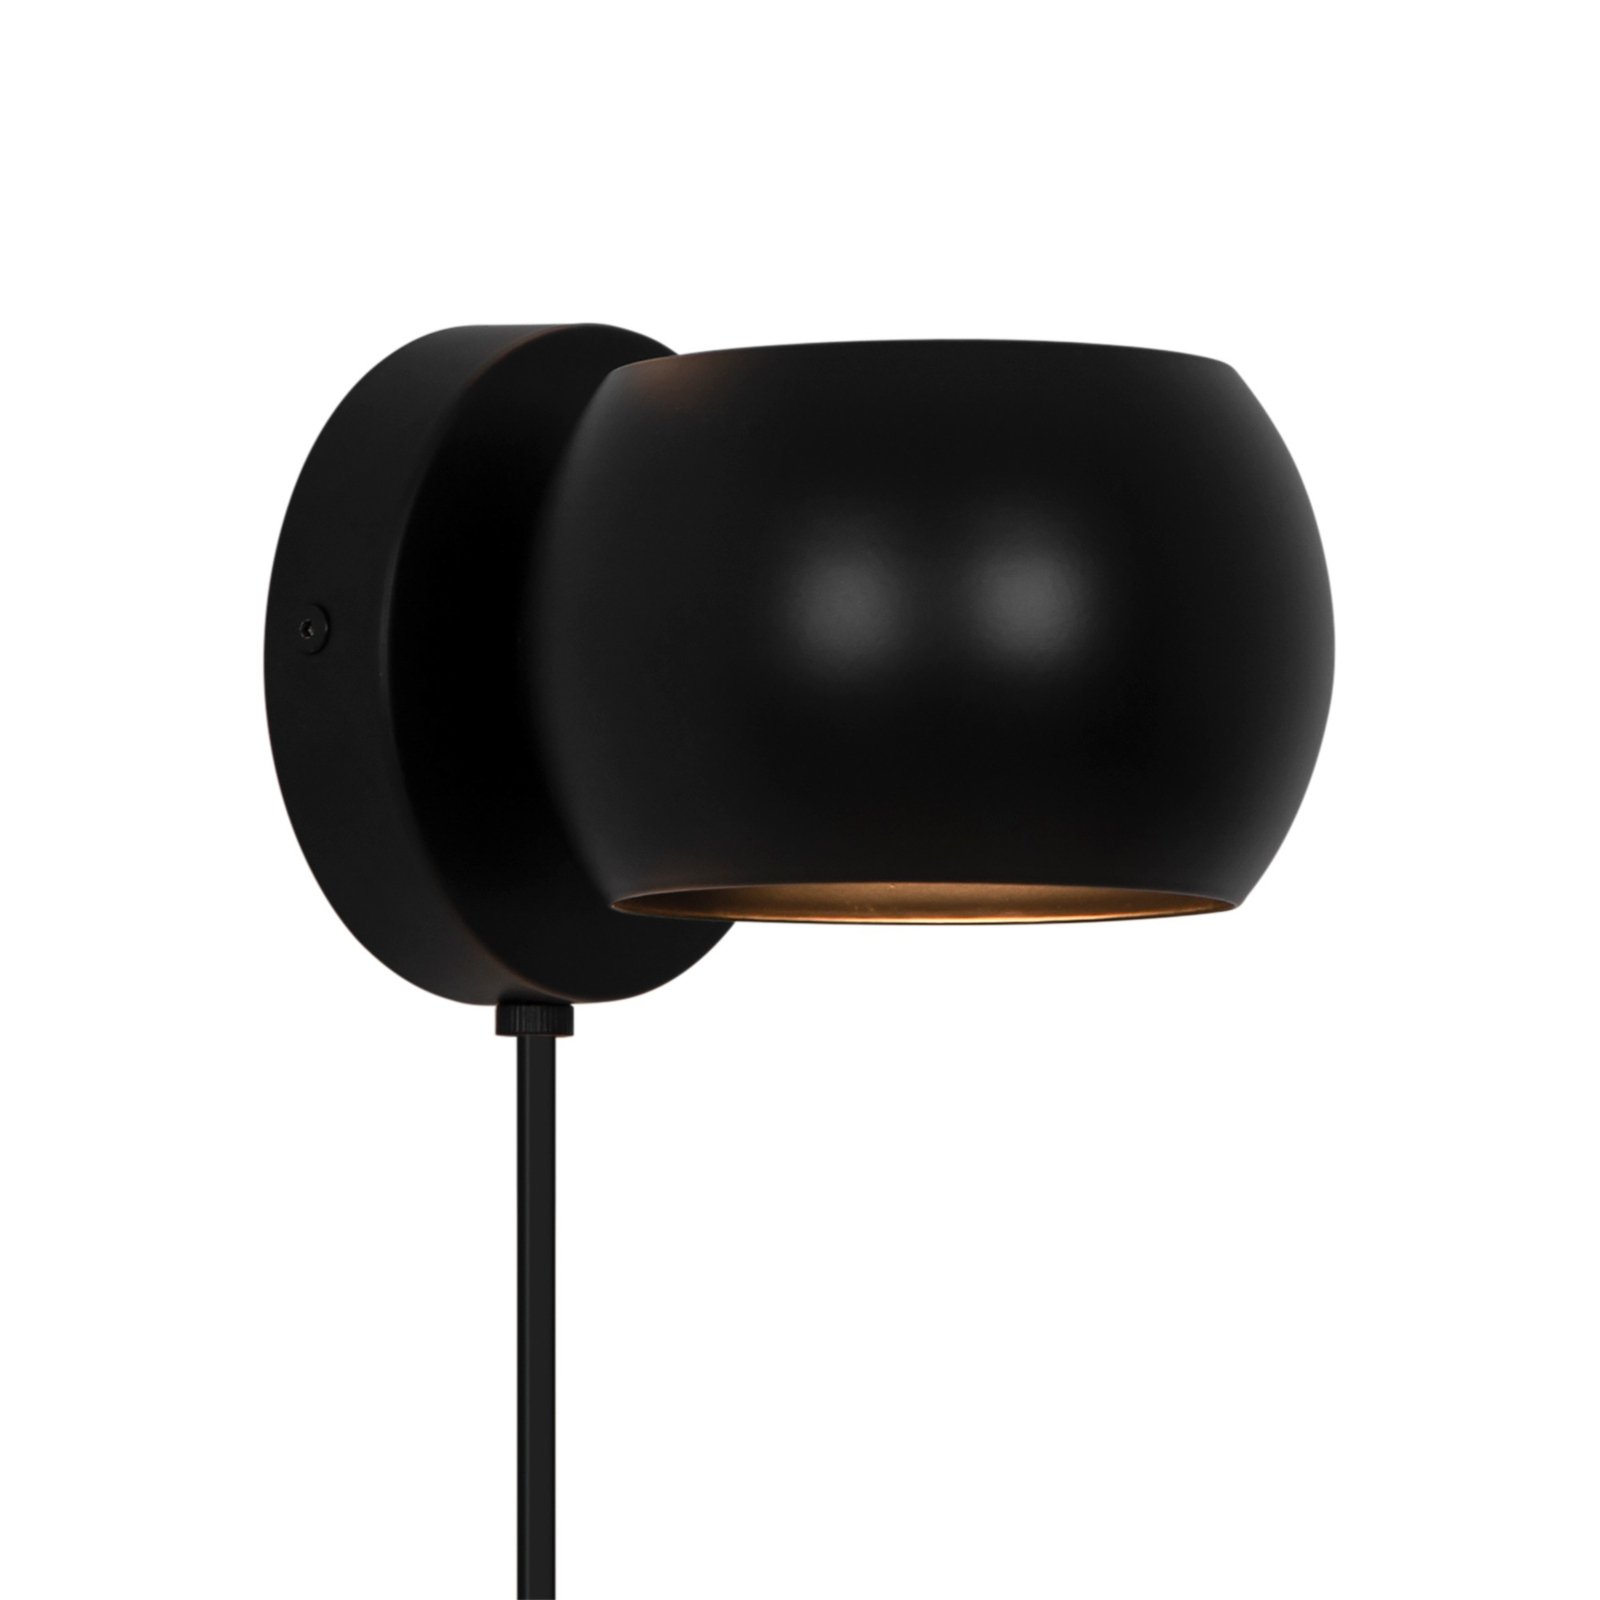 Belir wall light up/down with a plug, black